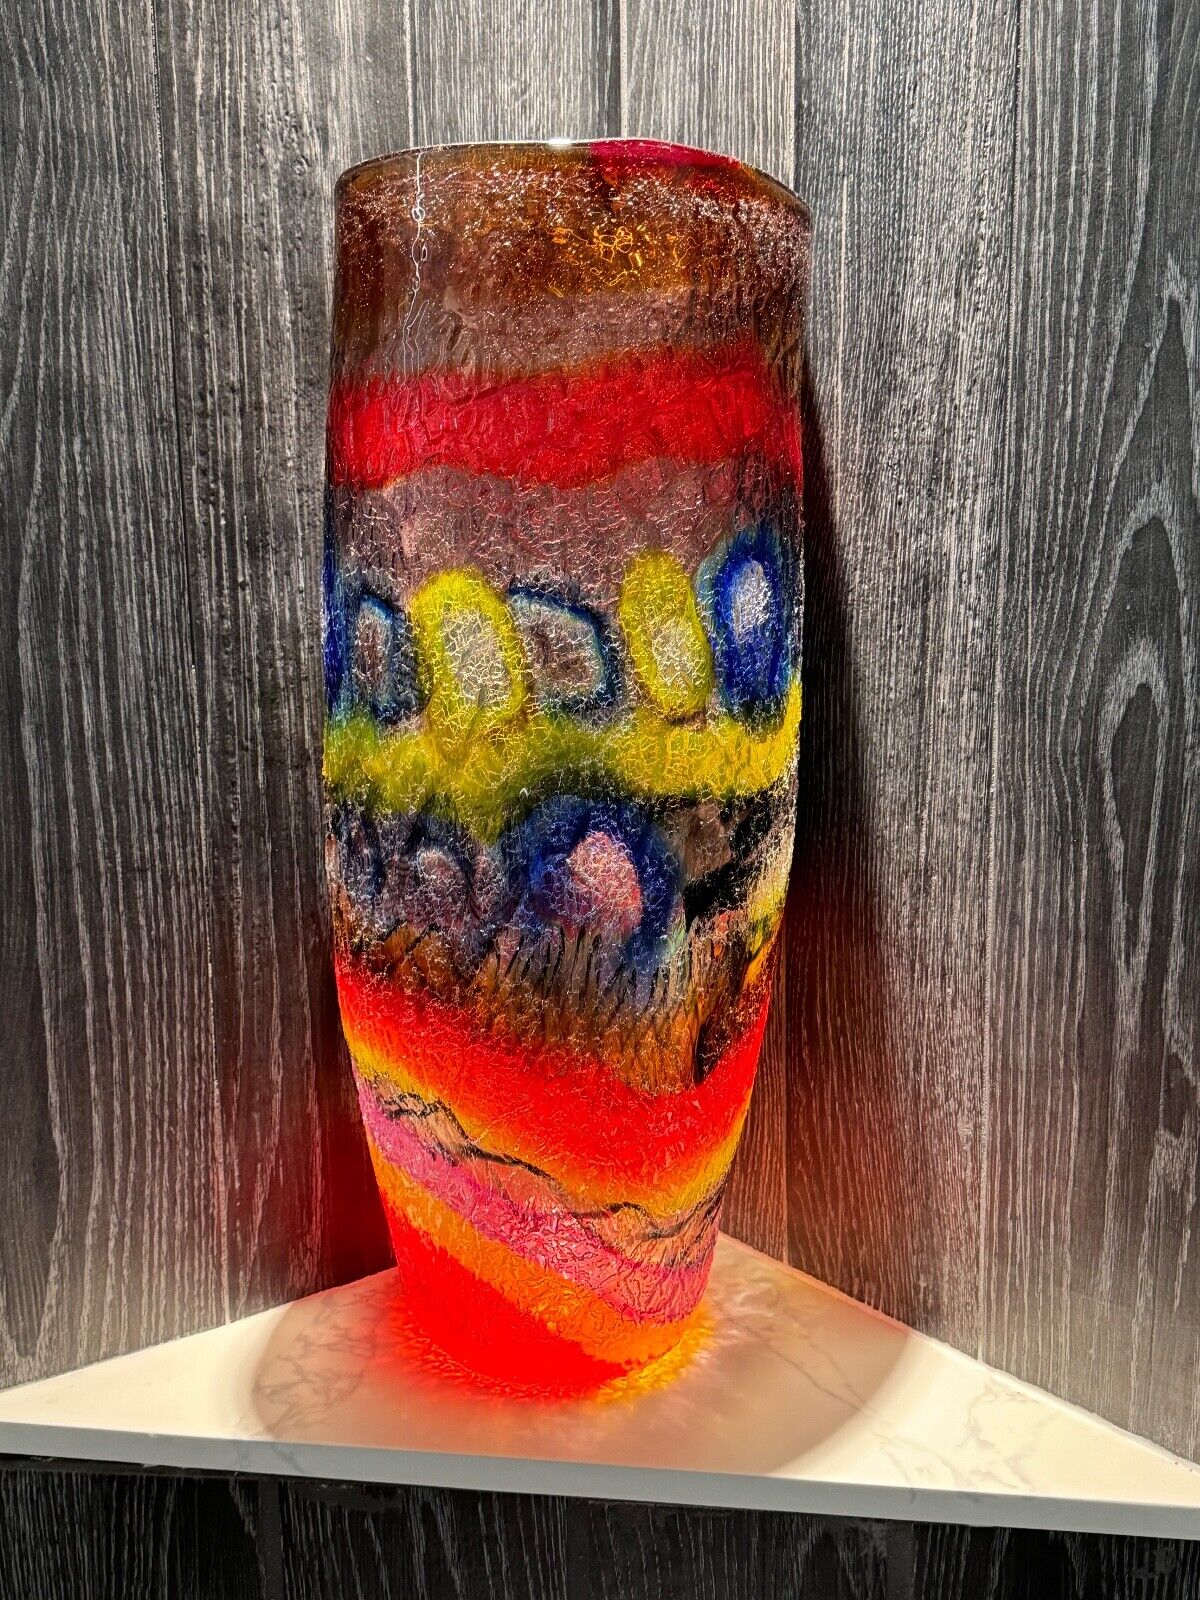 Murano glass vase with melted glass texture on the sides.   Colors are stunning